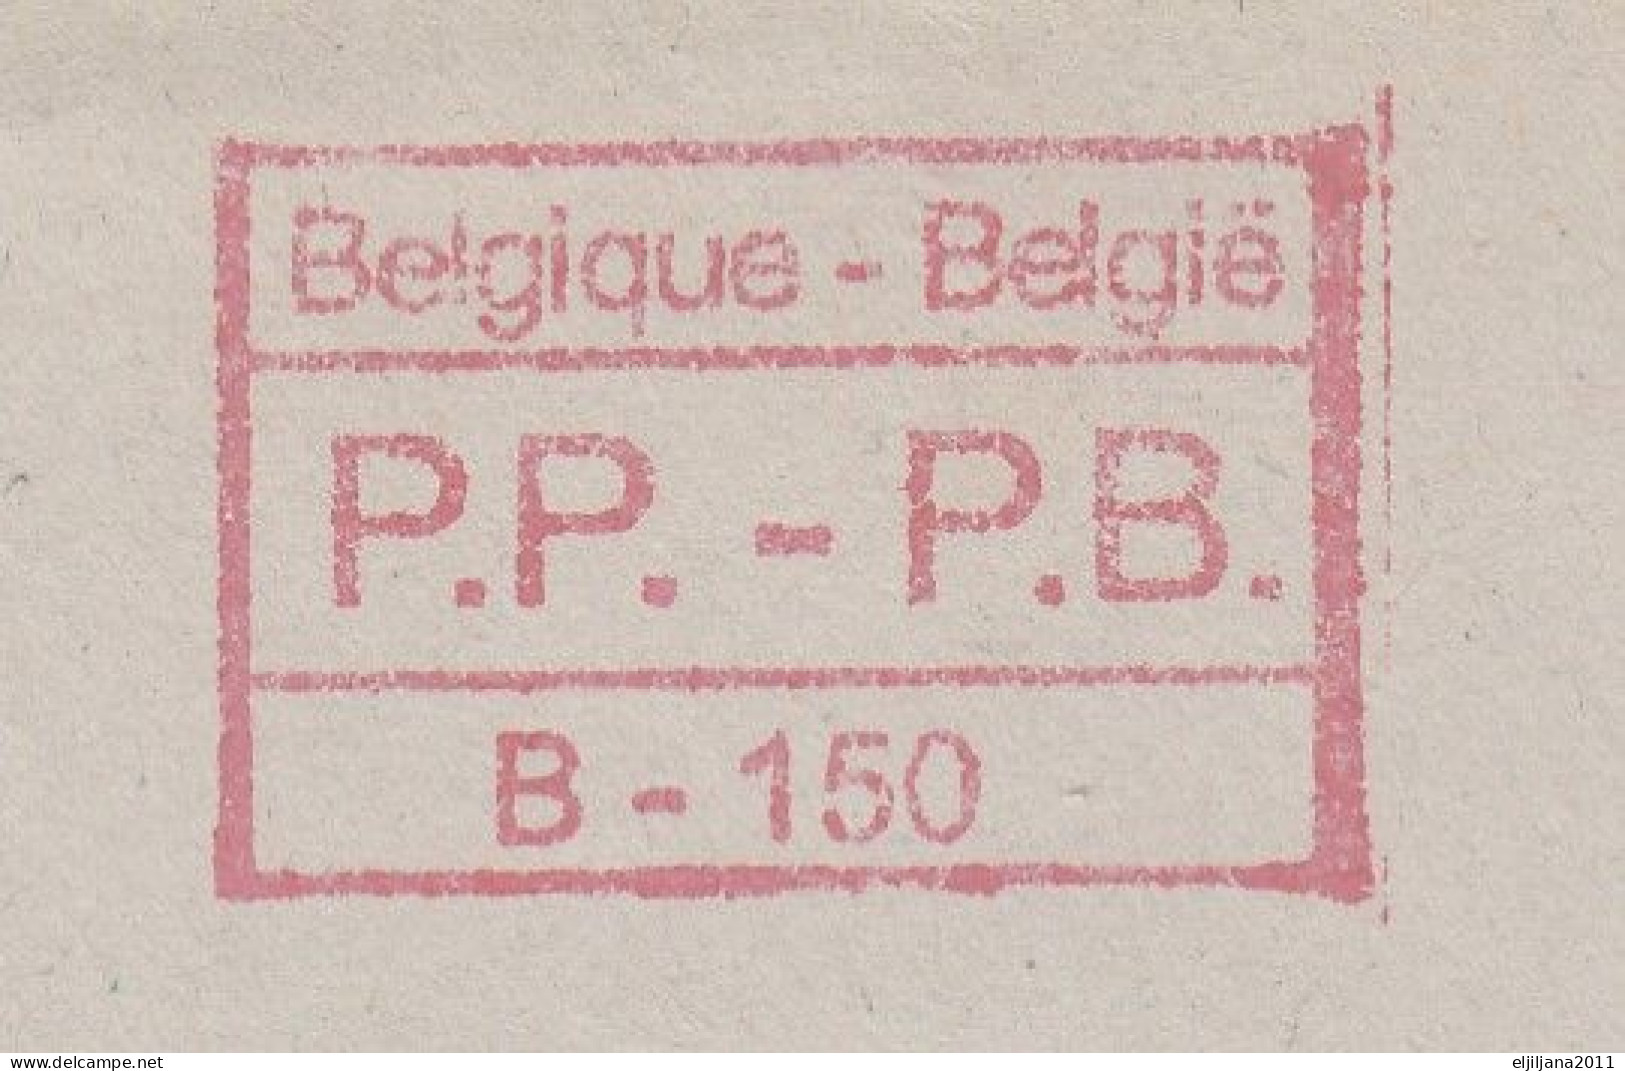 ⁕ Belgium / Belgique ⁕ Old Envelope With A Window P.P. - P.B. ⁕ Stationery Cover Mail Order Germany - Buste